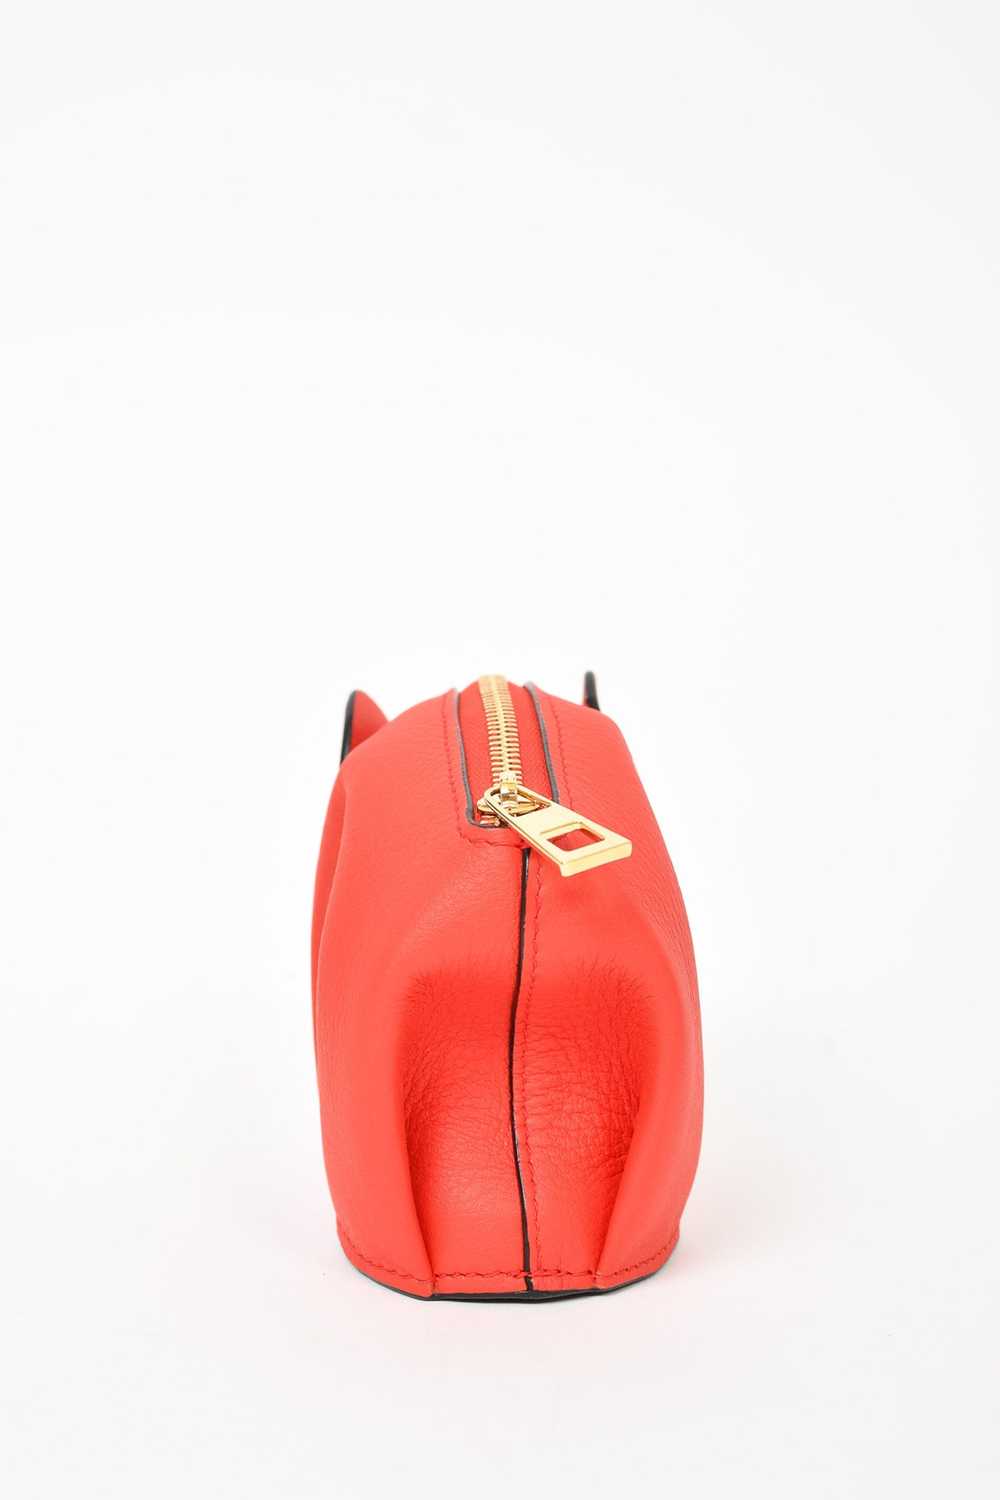 Loewe Red Leather Elephant Coin Purse - image 4